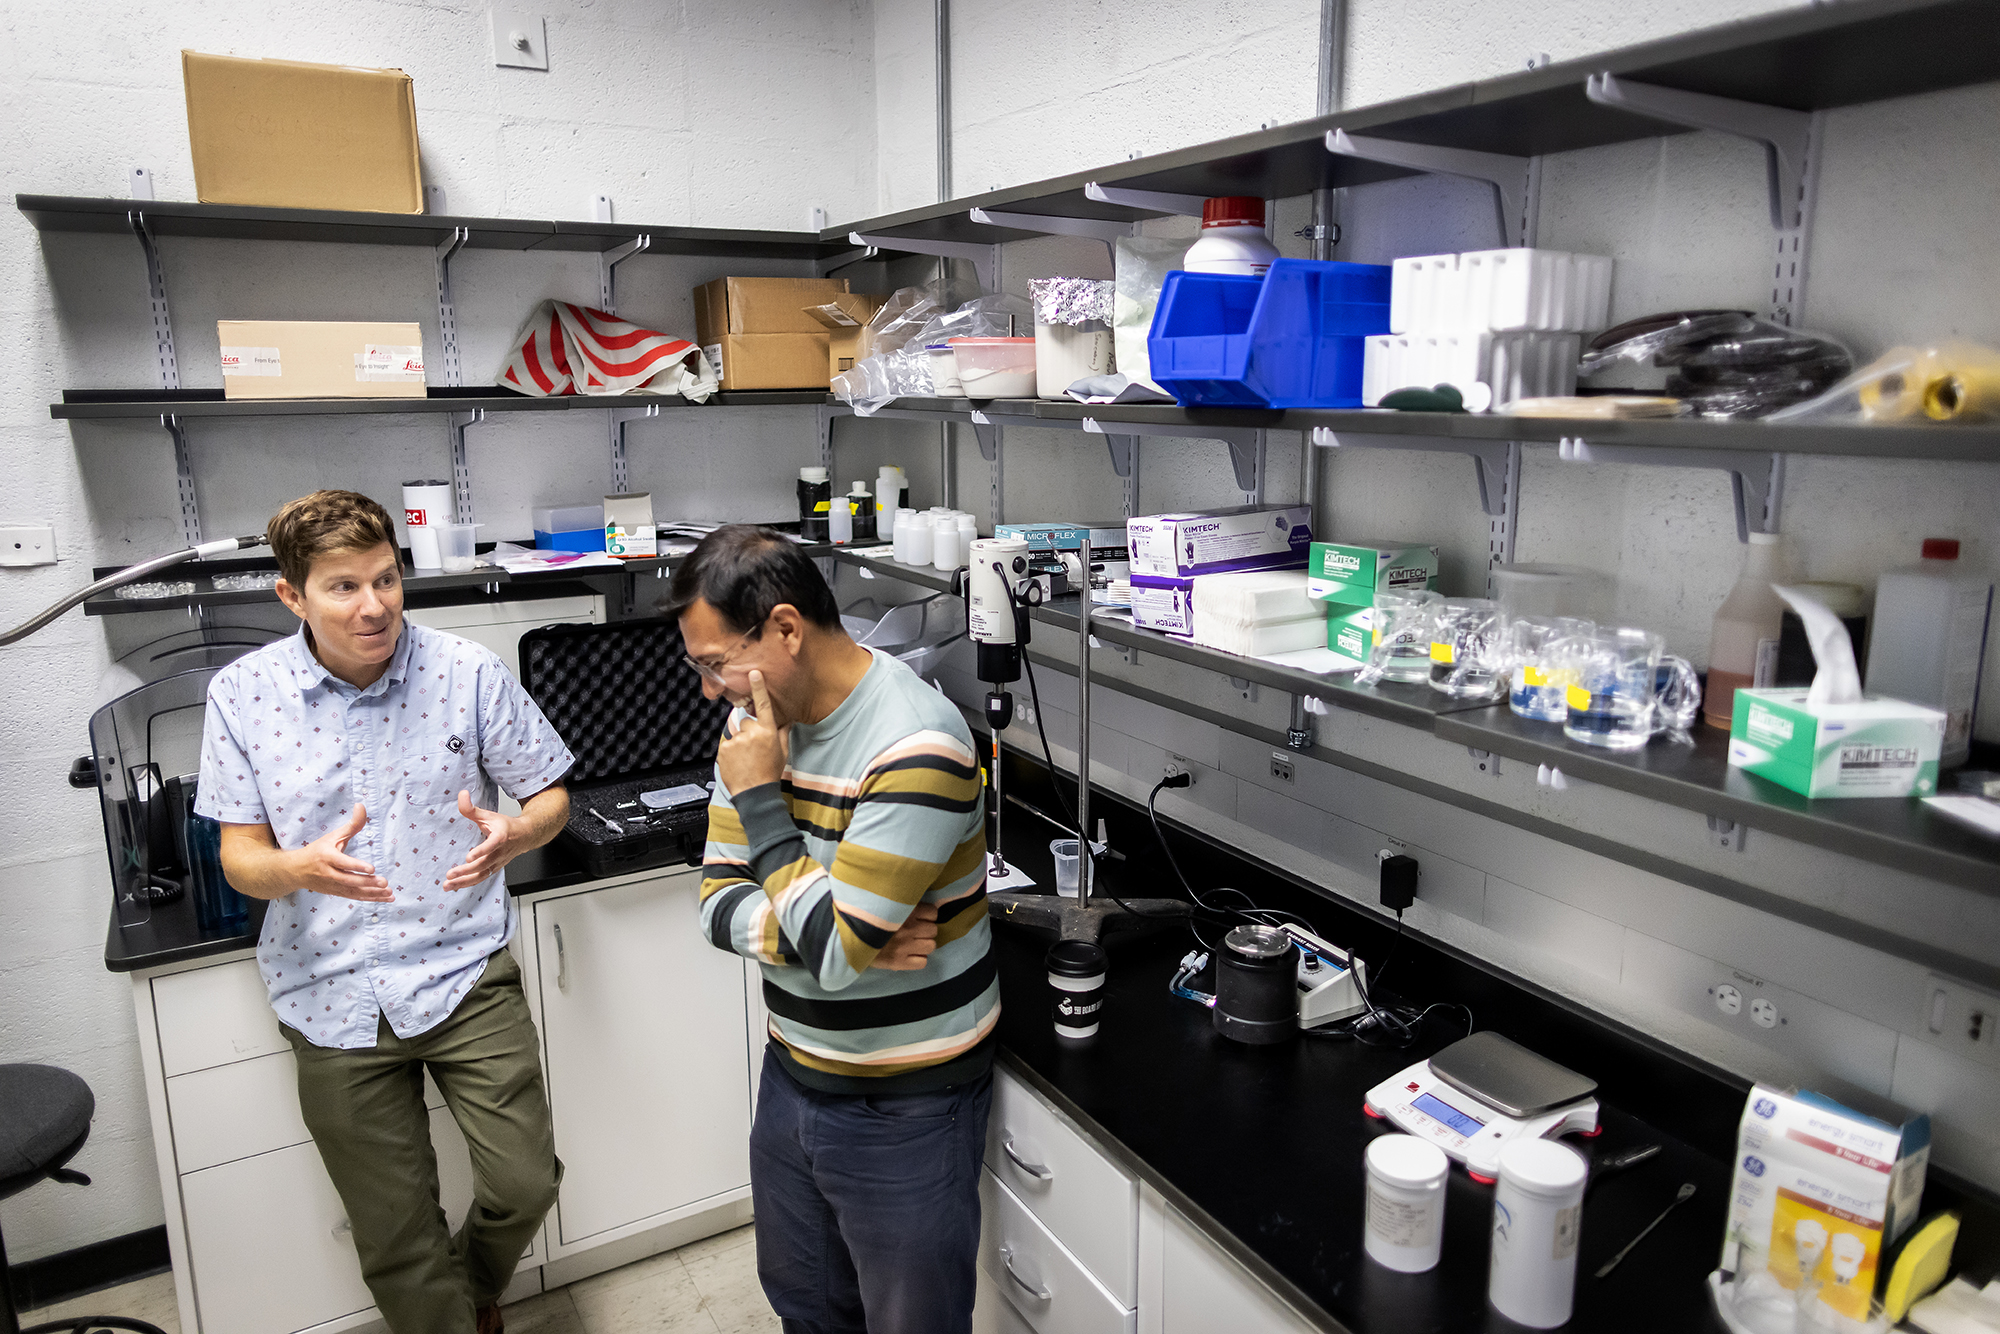 Douglas Jerolmack and Paulo Arratia pose for photo in their lab.